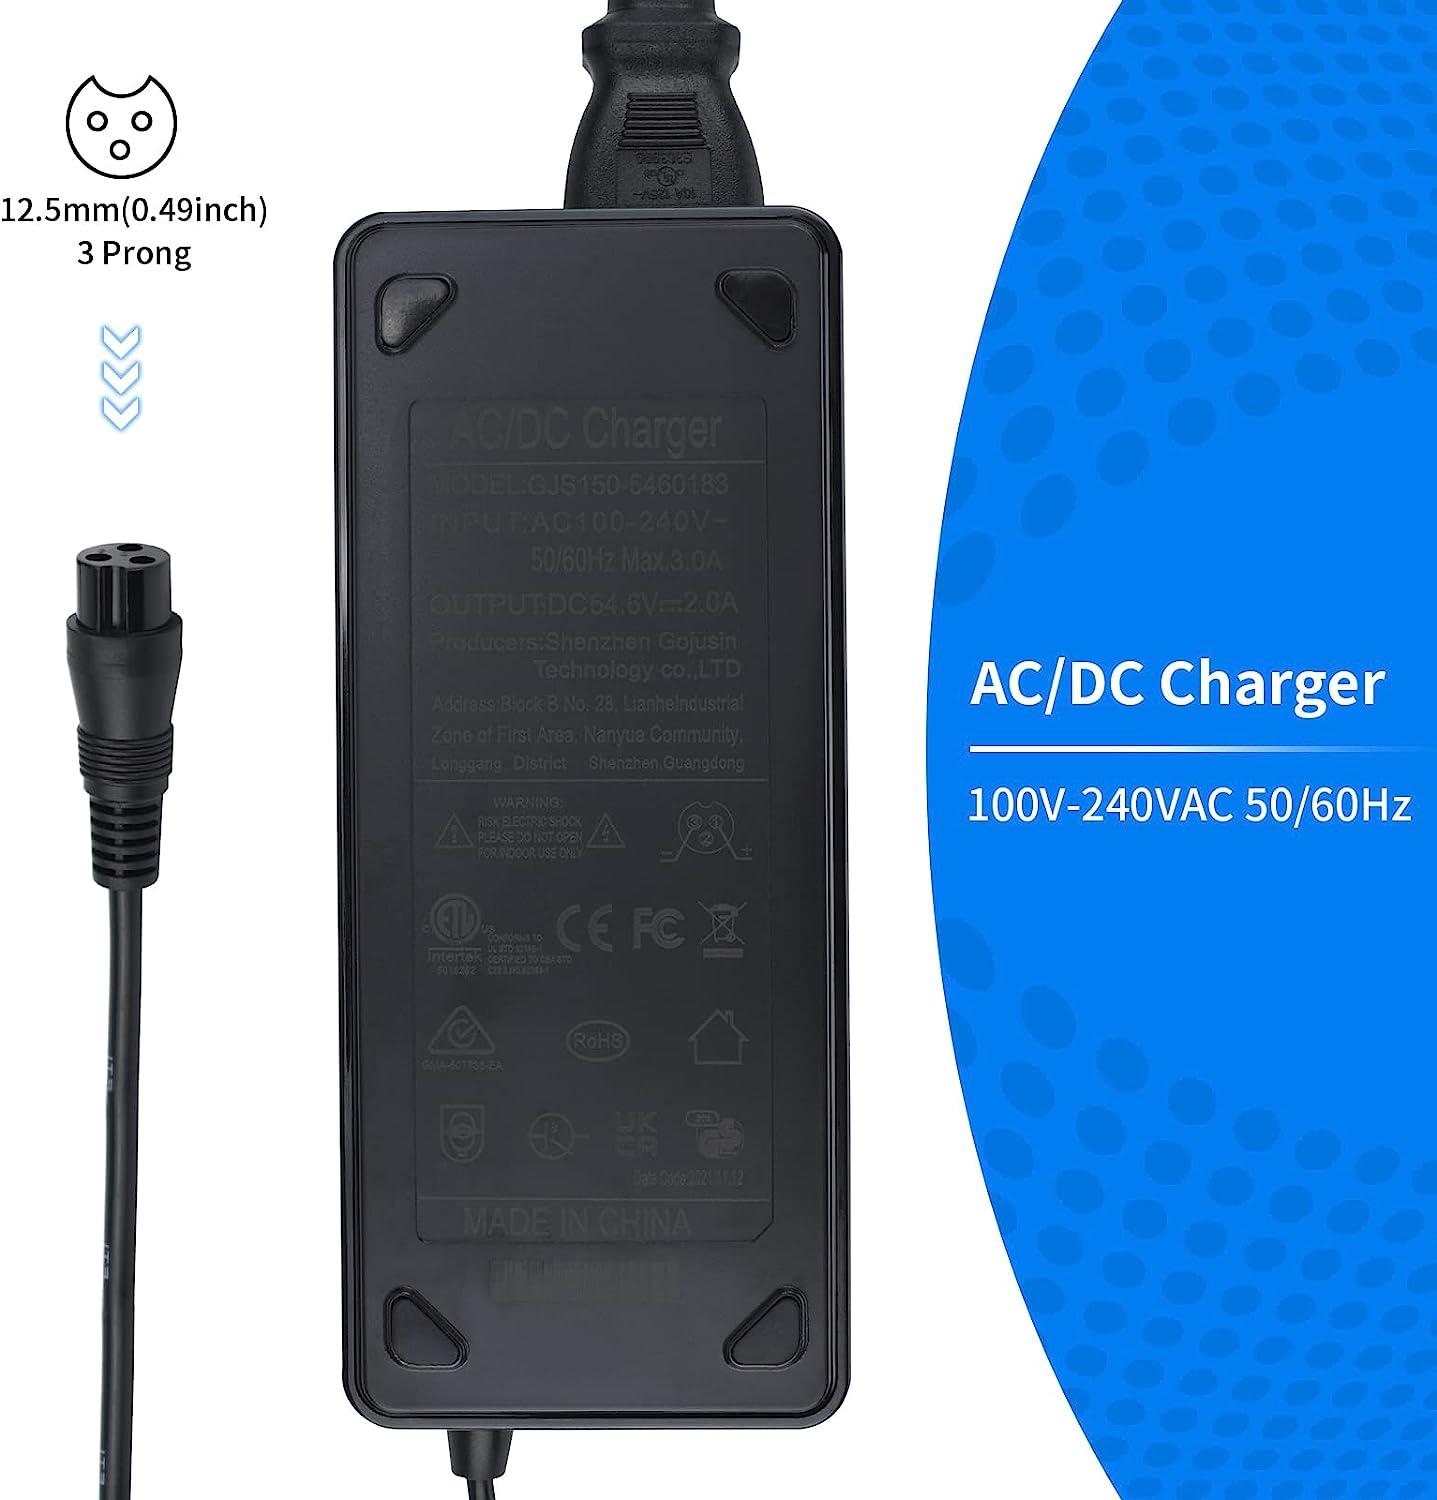 Charger 54.6V 2A GX16 ( For 48V Battery) with fan